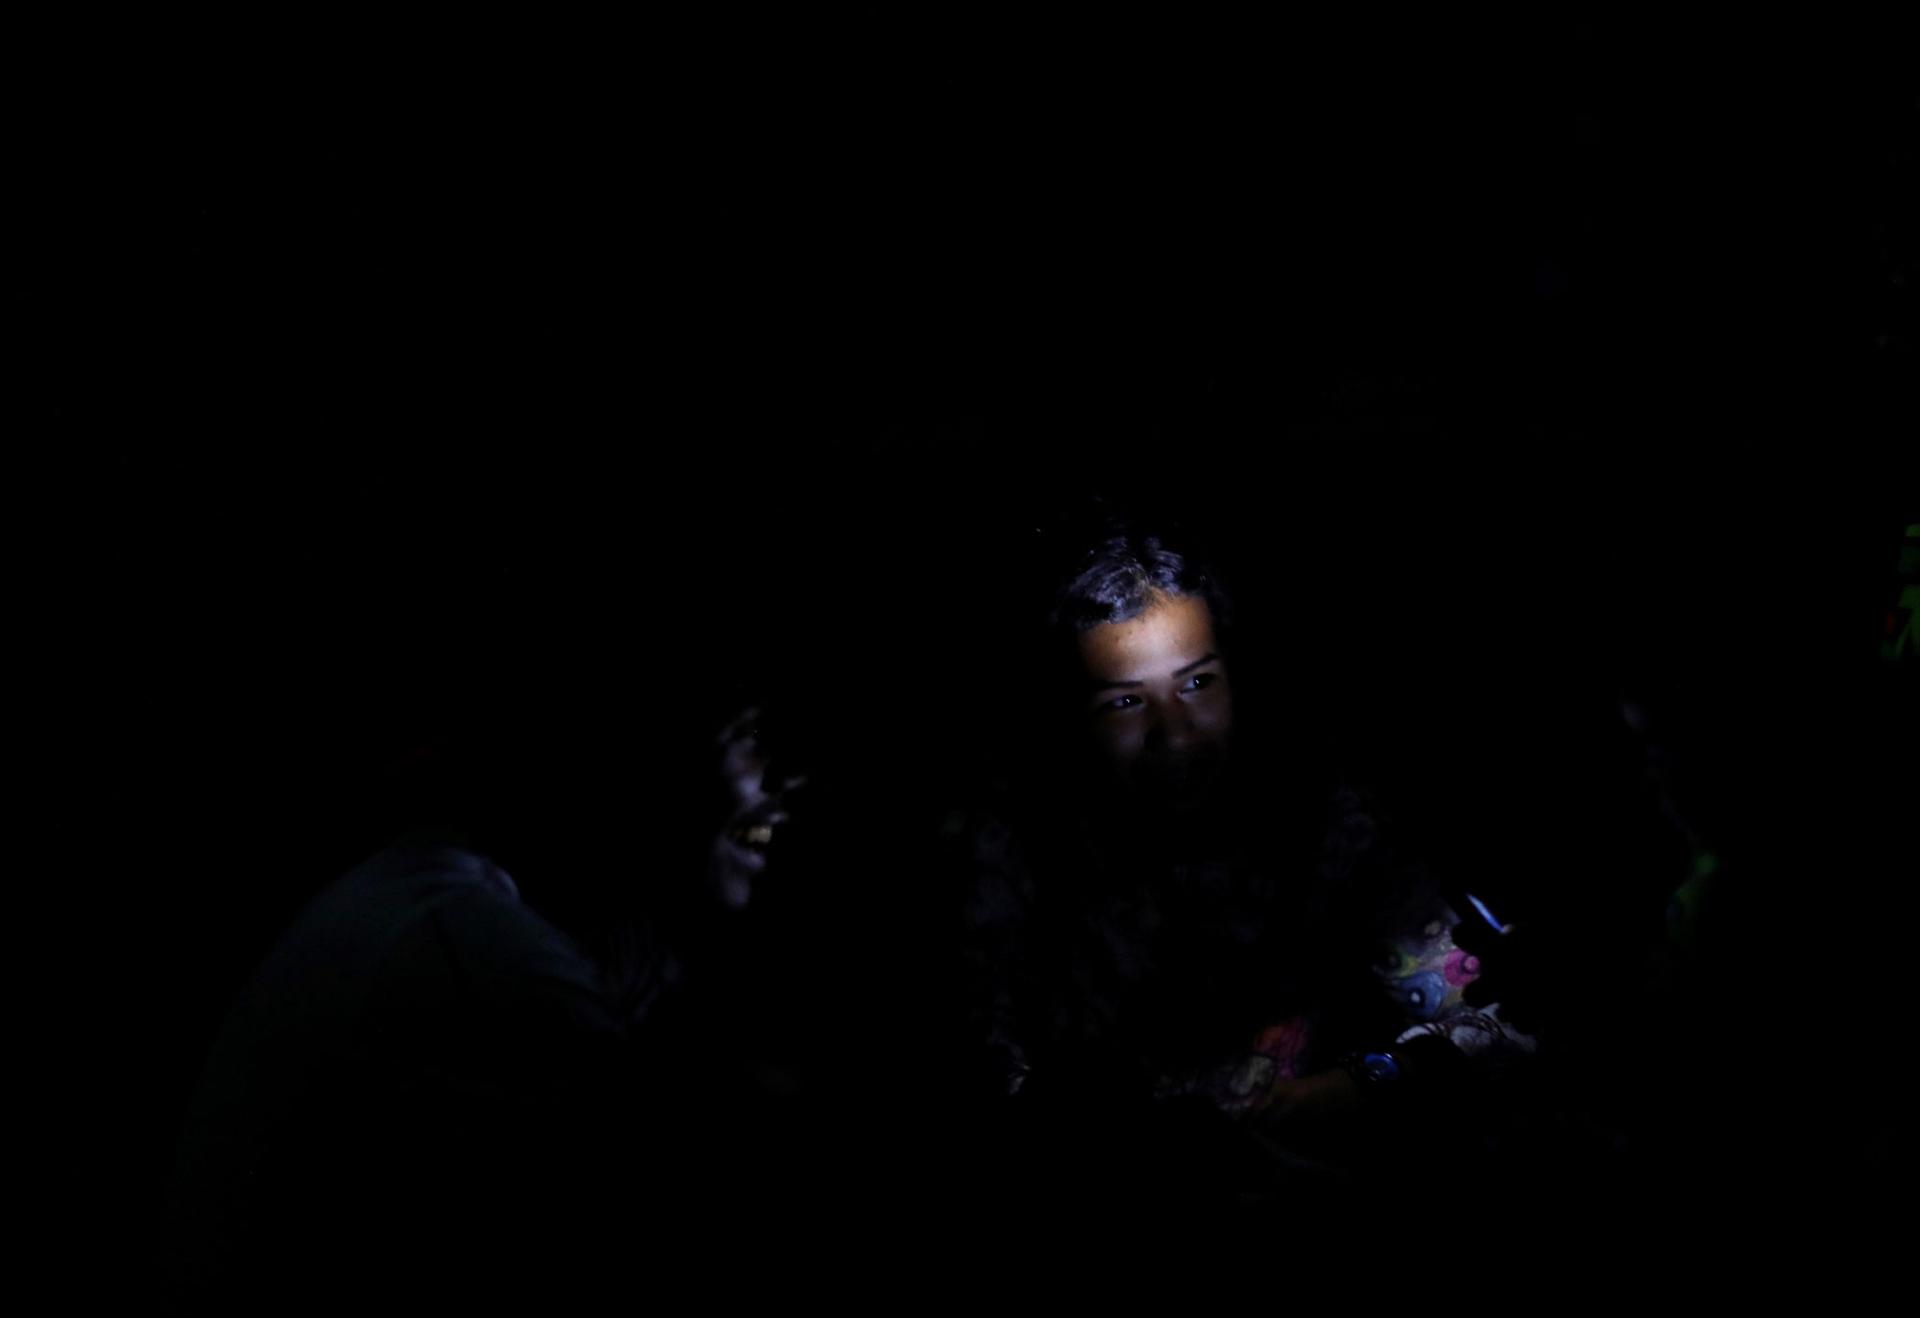 In a nearly all dark photograph, a child's face is illuminated by a cellphone light.